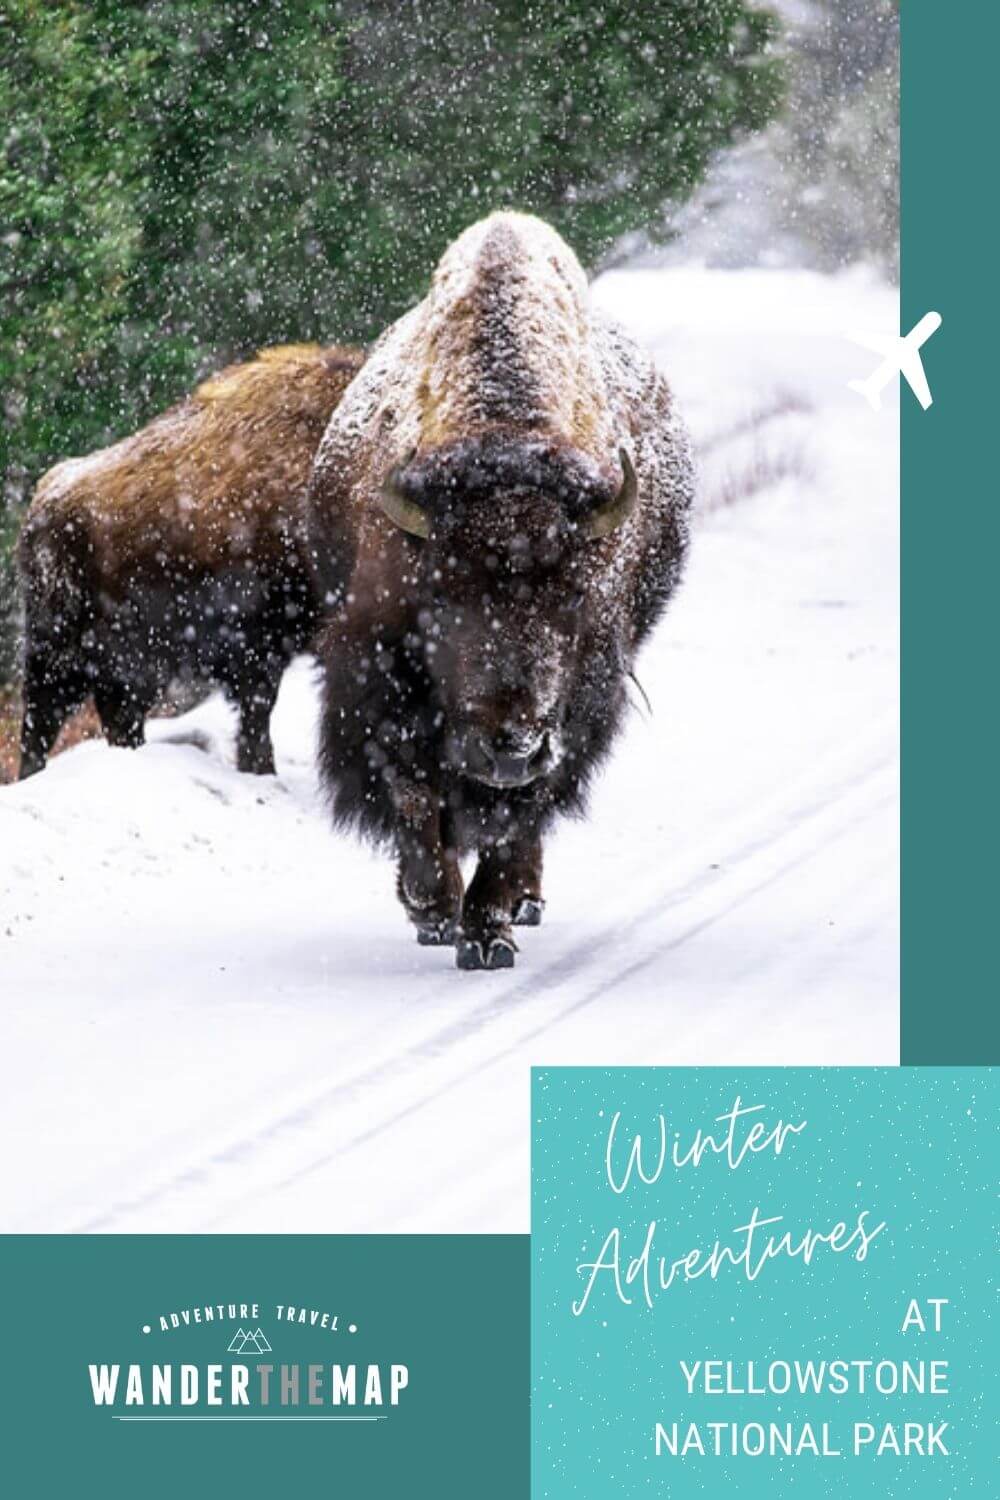 DIY Winter Adventures in Yellowstone National Park